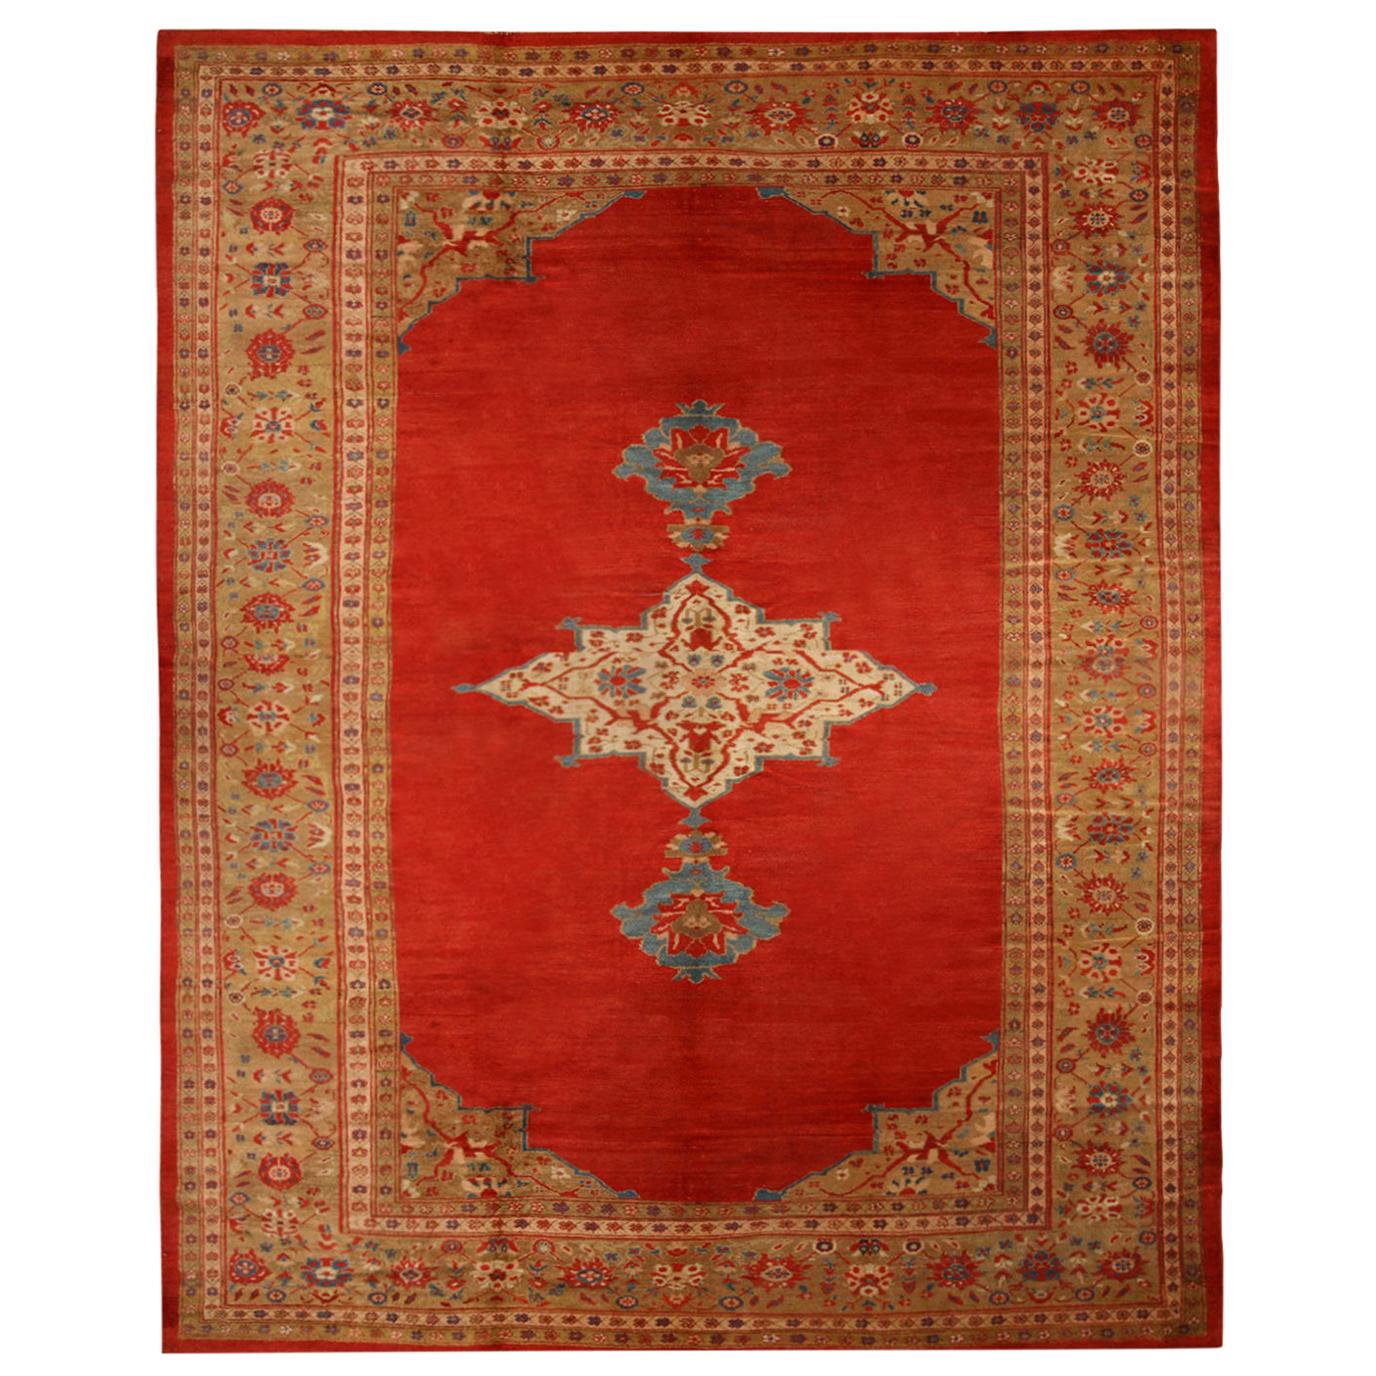 Antique Sultanabad Red and Blue Wool